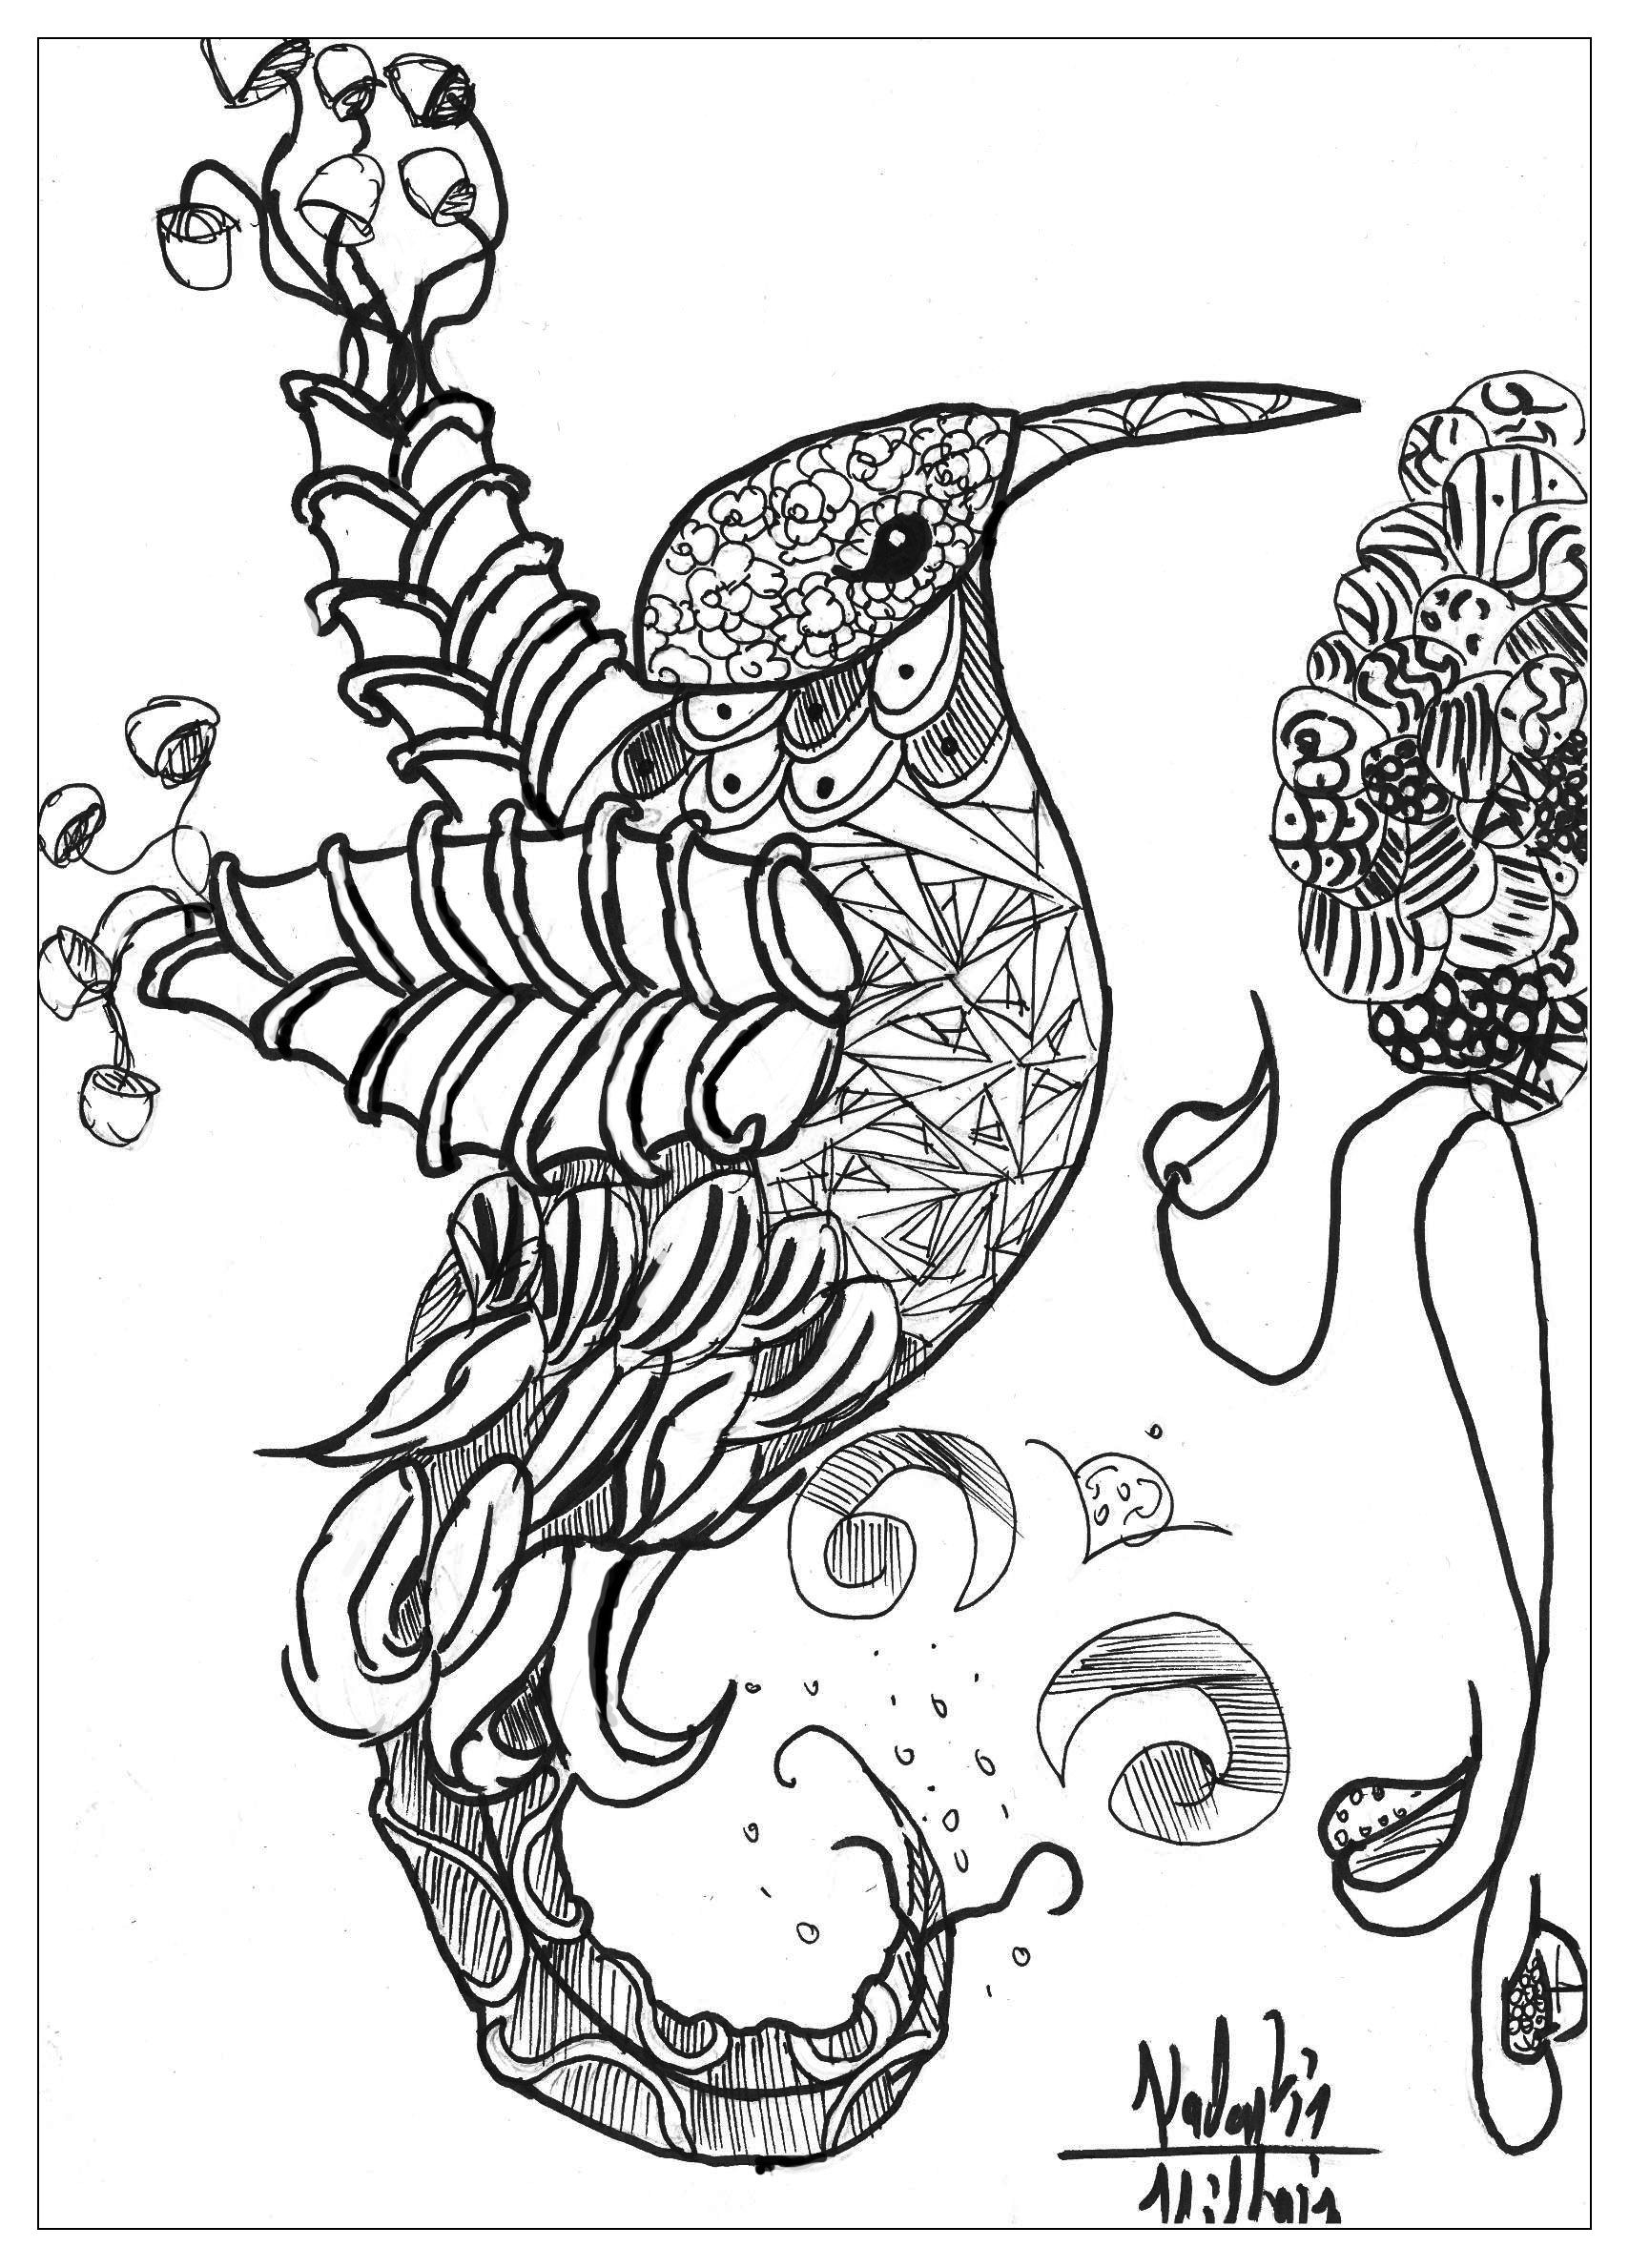 free-animal-design-coloring-pages-download-free-animal-design-coloring-pages-png-images-free